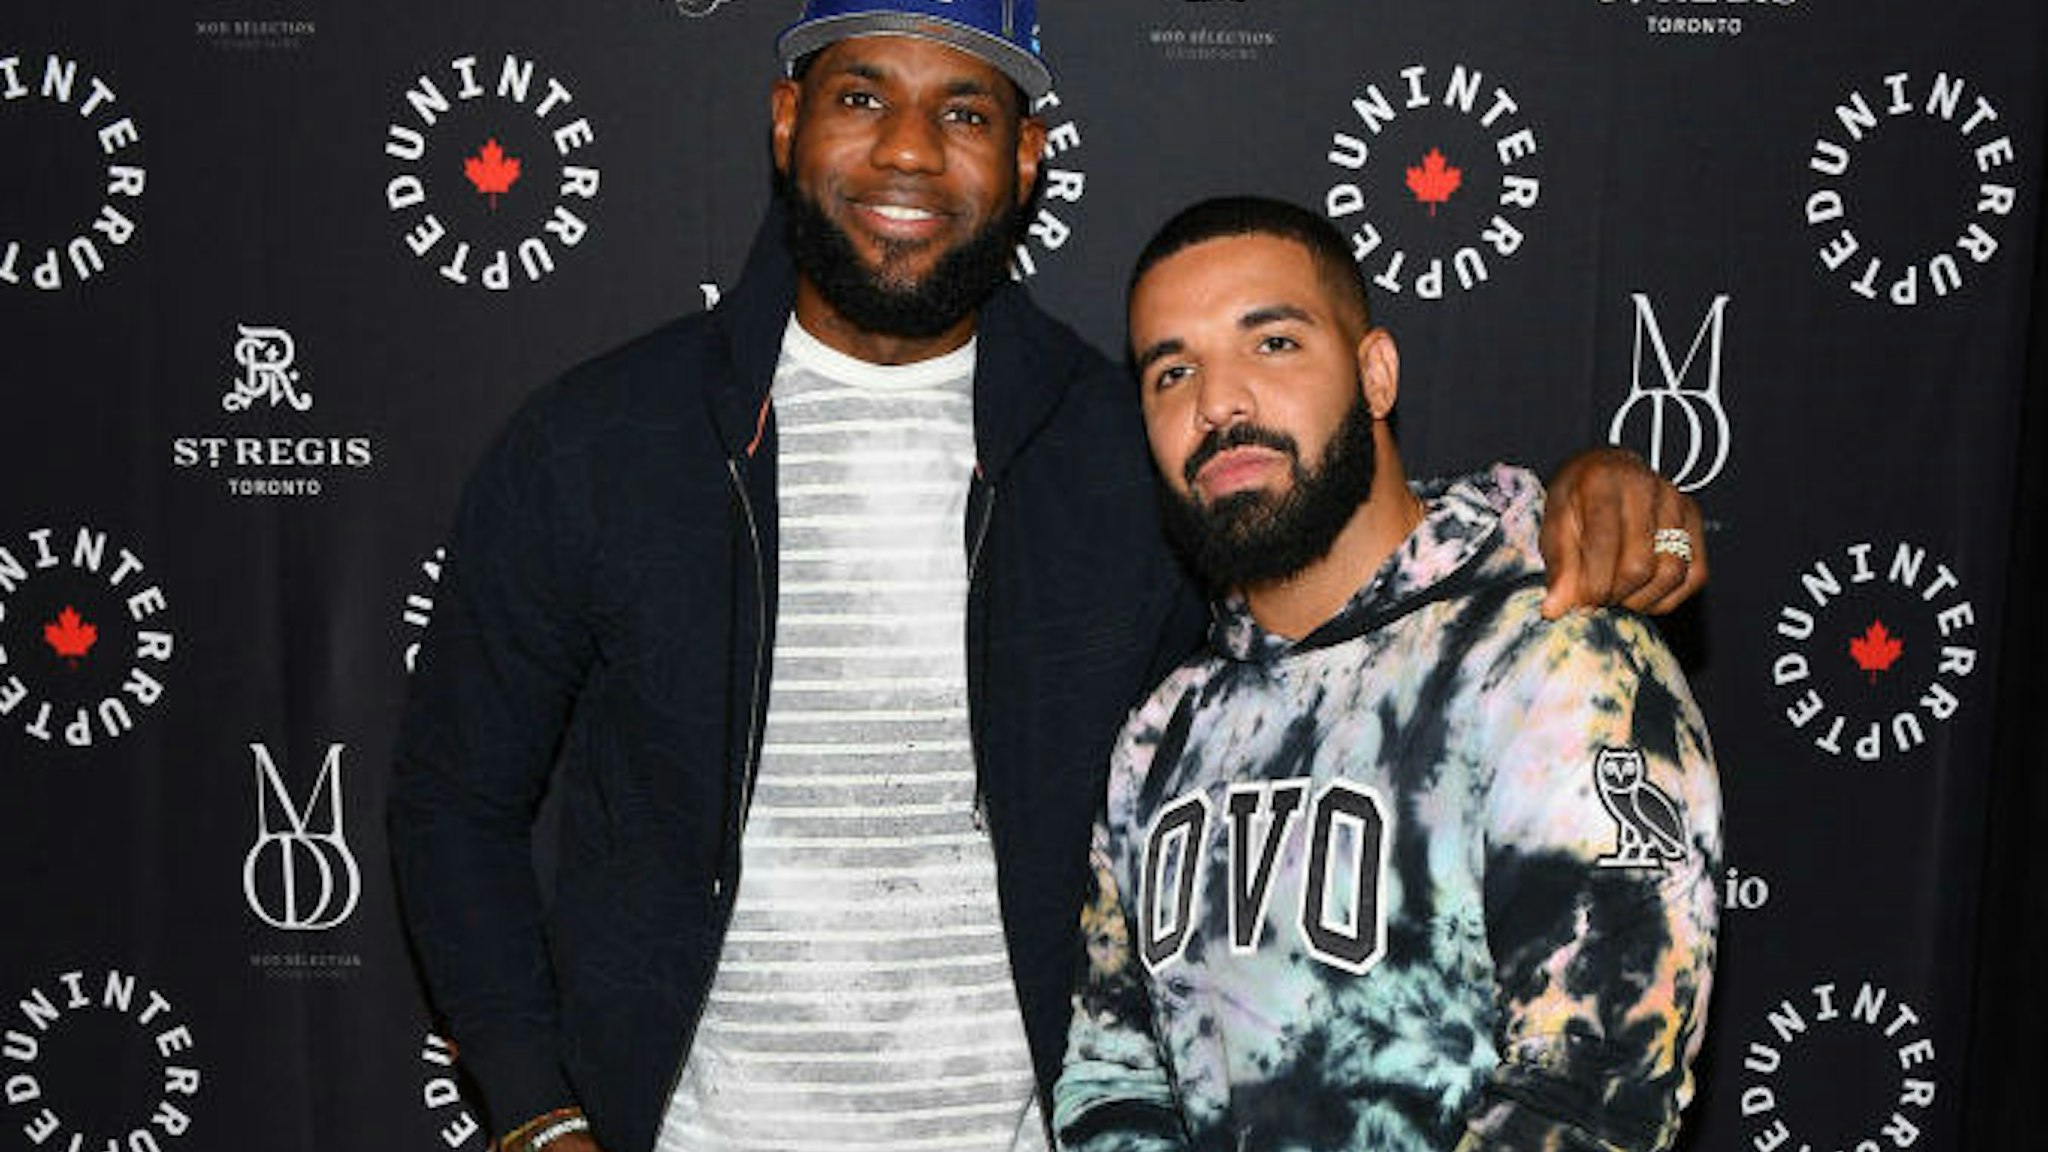 TORONTO, ONTARIO - AUGUST 02: NBA Player Lebron James and Rapper Drake attend the Uninterrupted Canada Launch held at Louis Louis at The St. Regis Toronto on August 02, 2019 in Toronto, Canada. (Photo by George Pimentel/Getty Images)